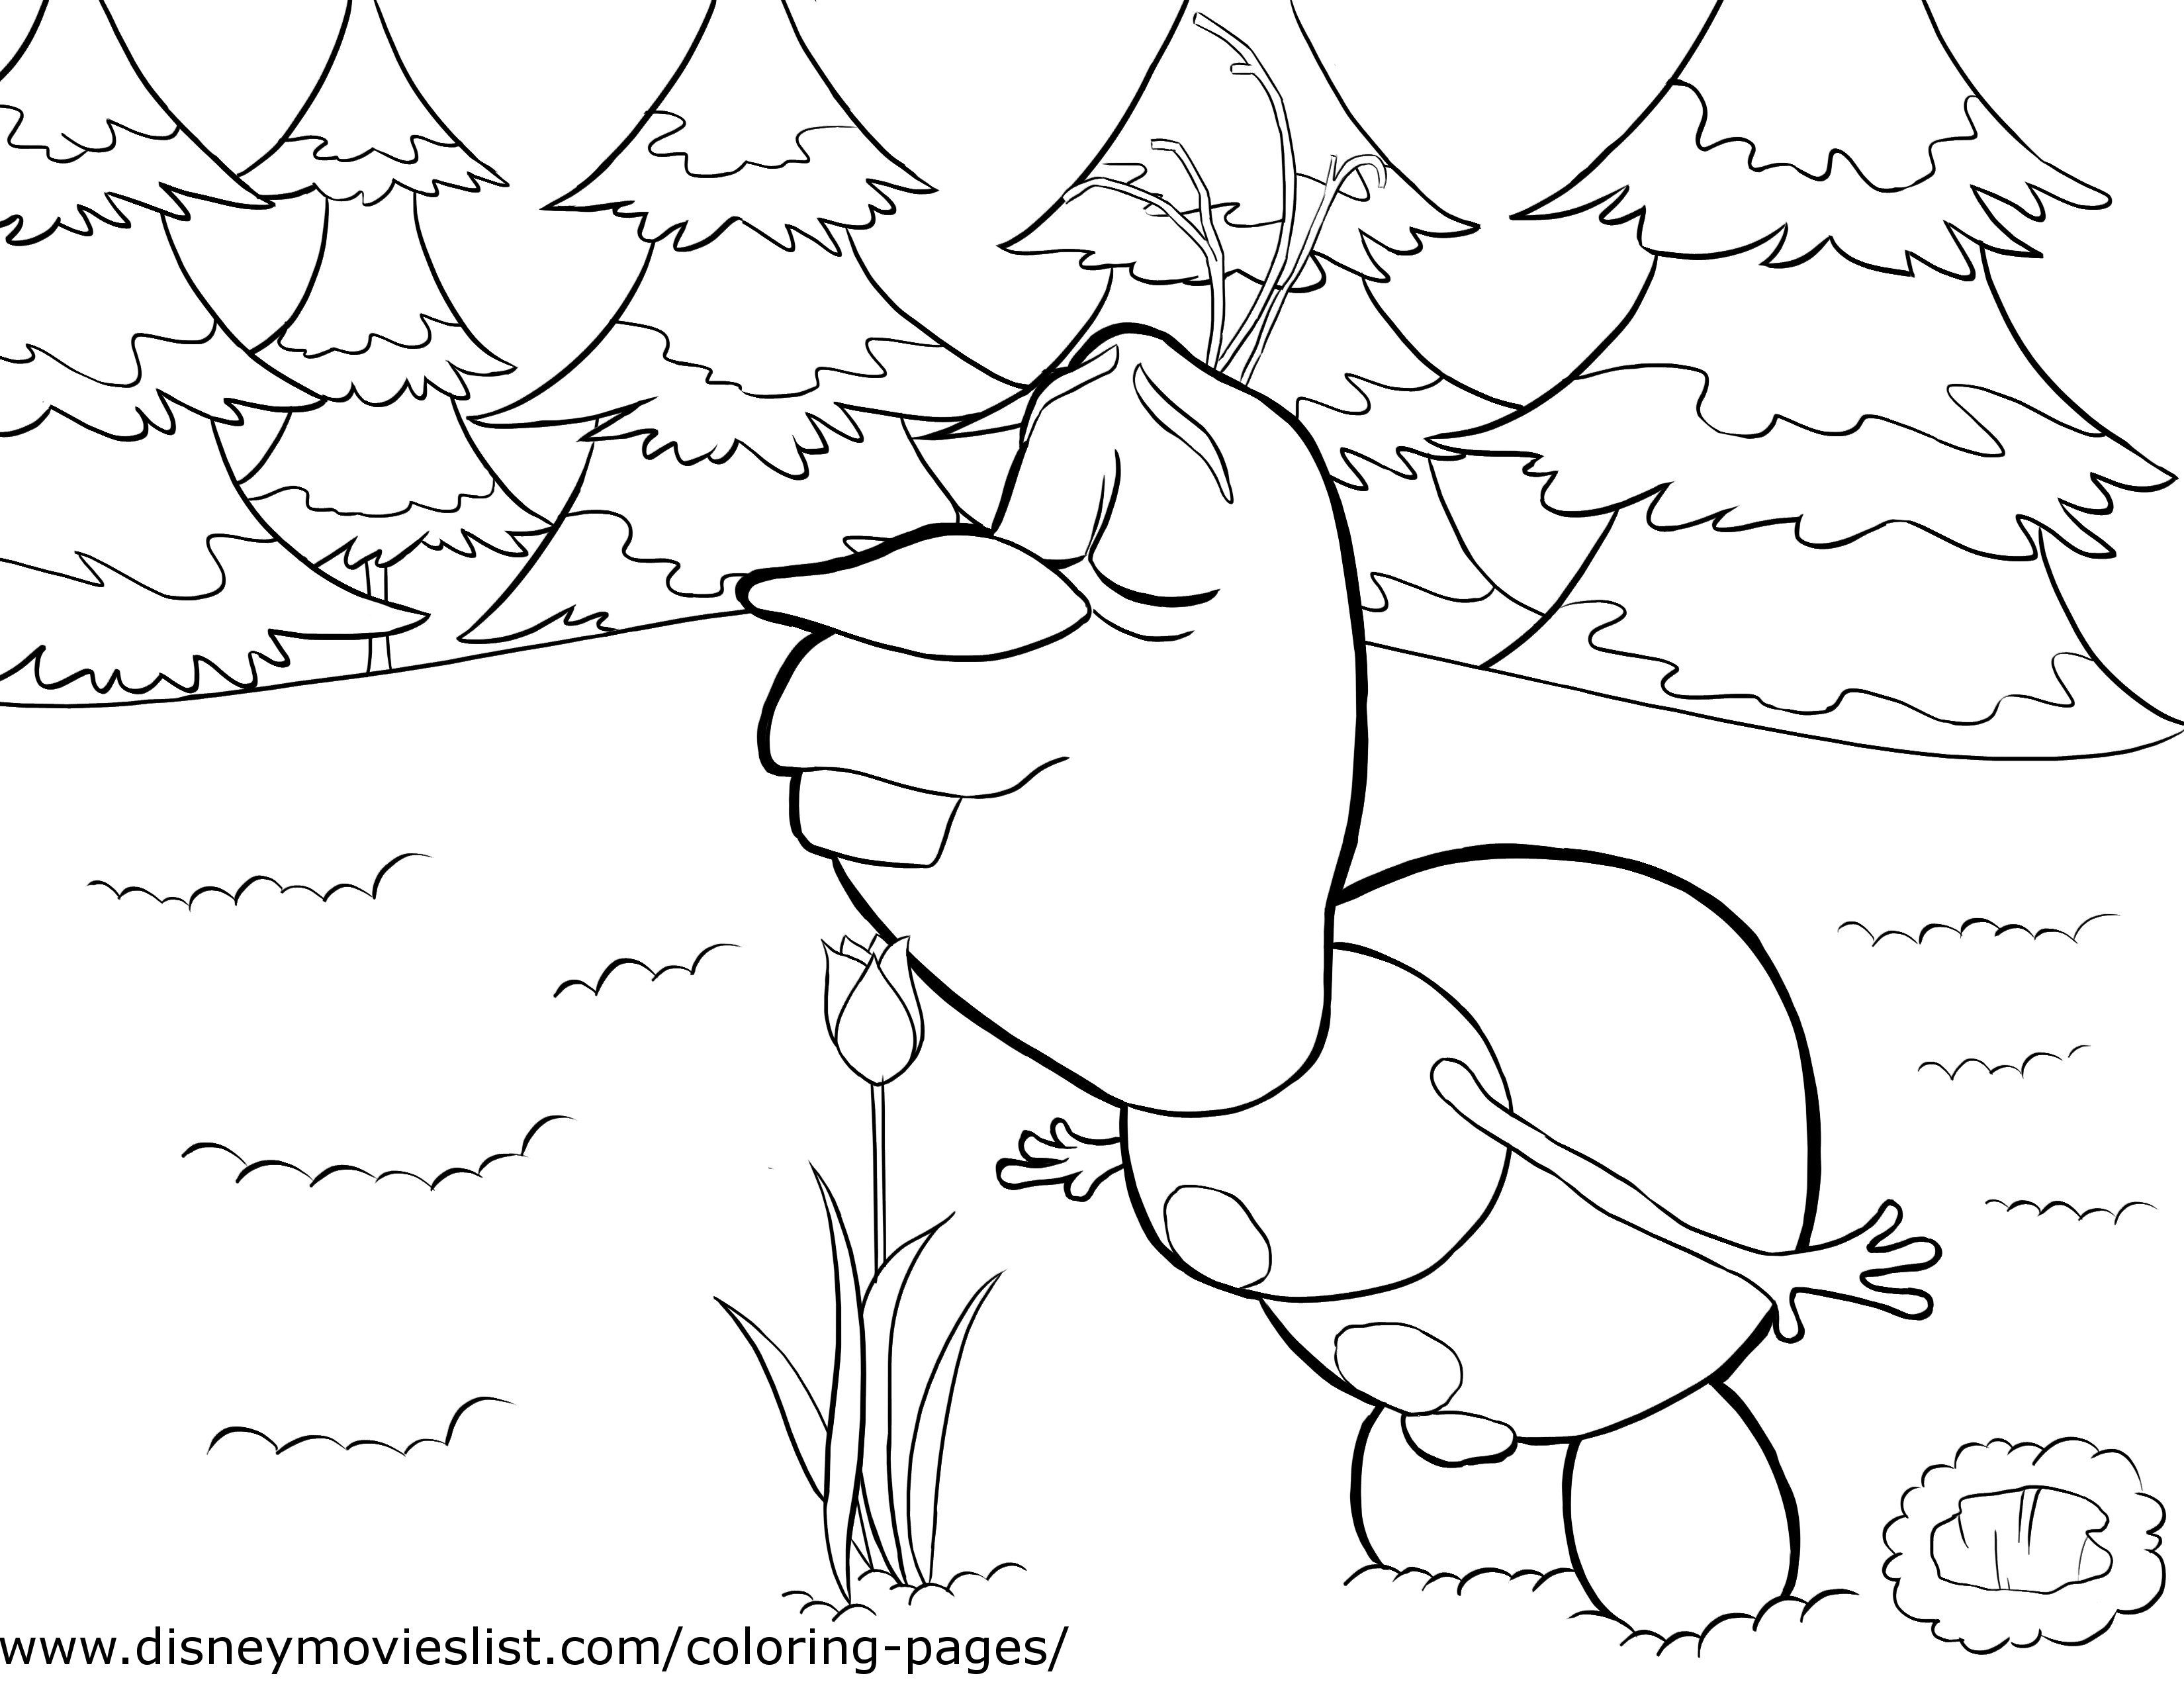 Printables Coloring Pages Coloring Free Printable Coloring Pages Pdf Free Printable Coloring